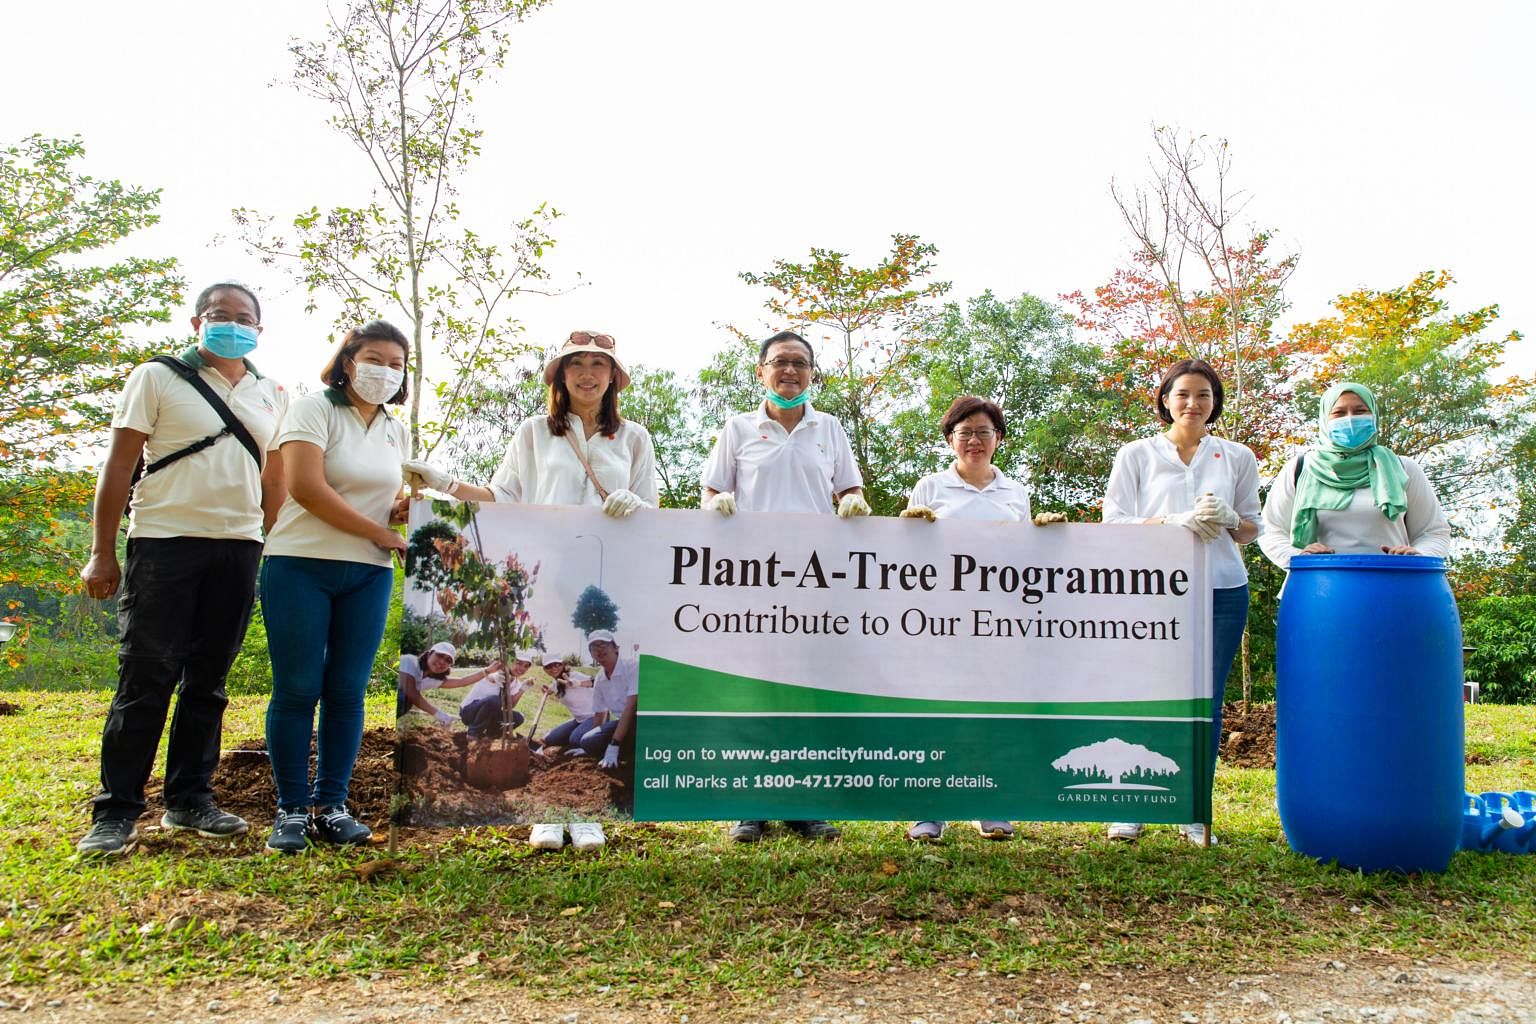 Hospital Plants 50 Trees In Support Of Nparks 1 Million Tree Goal Singapore News Top Stories The Straits Times